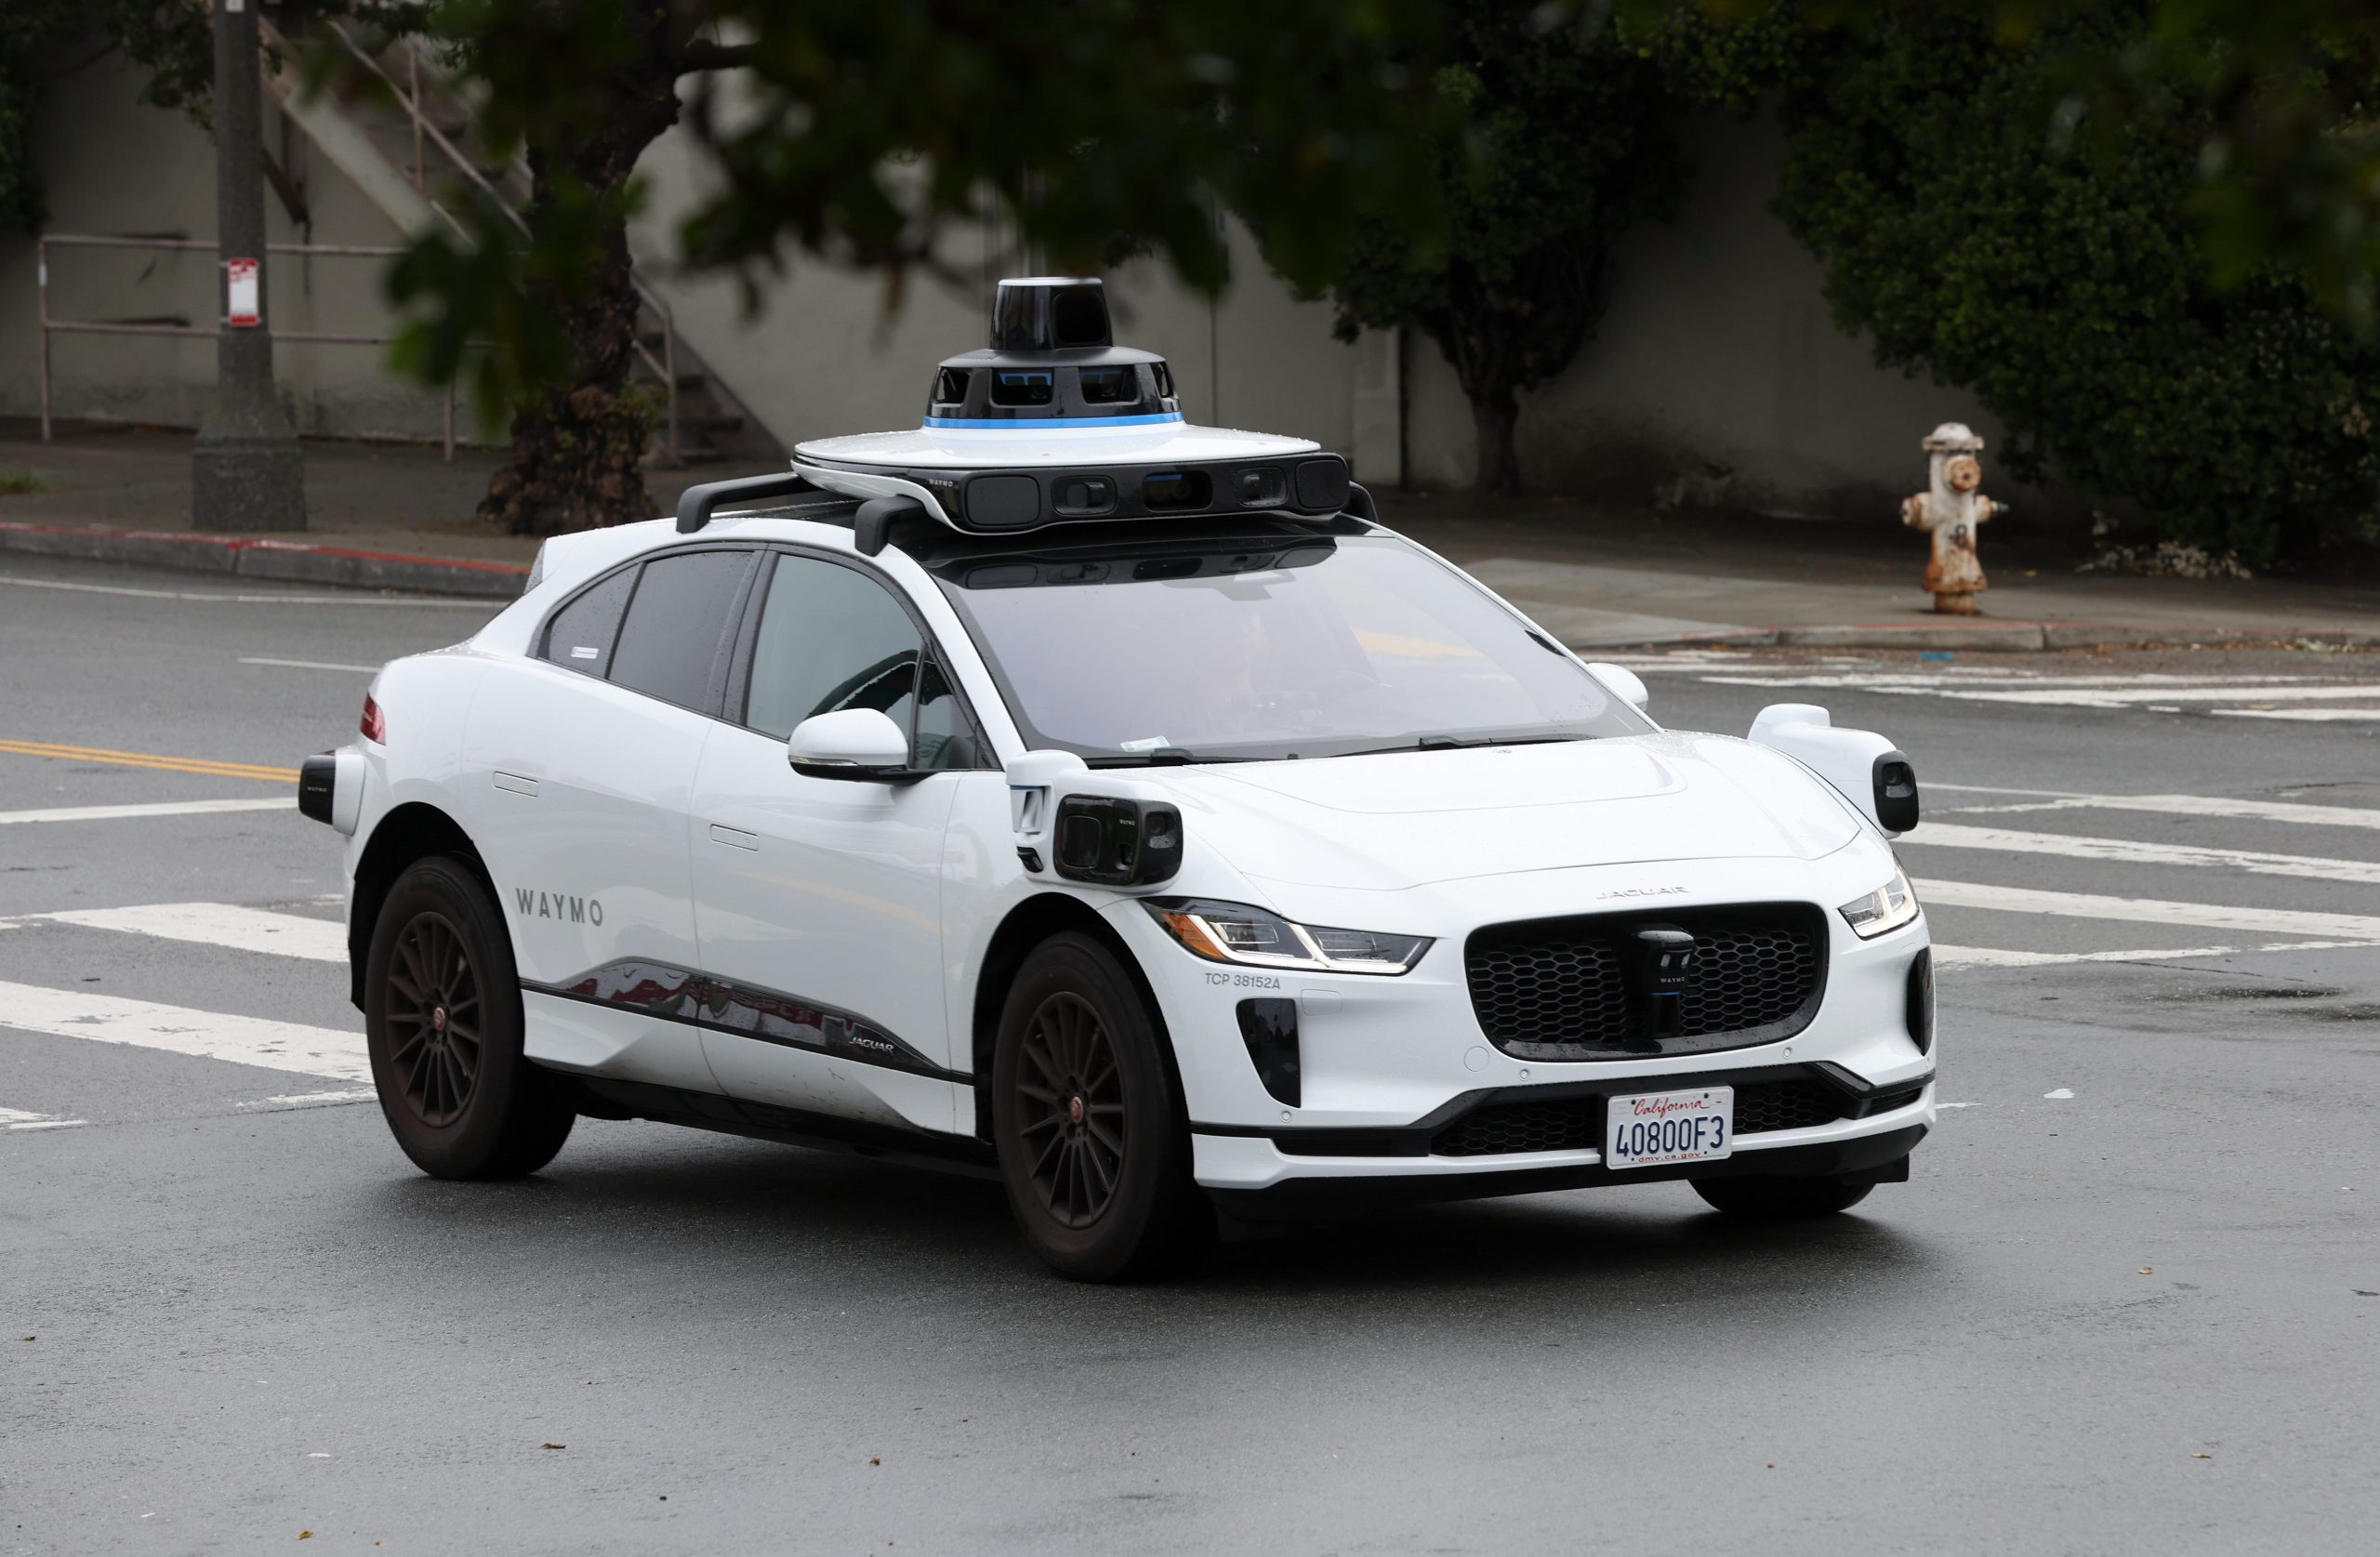 Free robotaxi rides are coming to L.A. [Video]